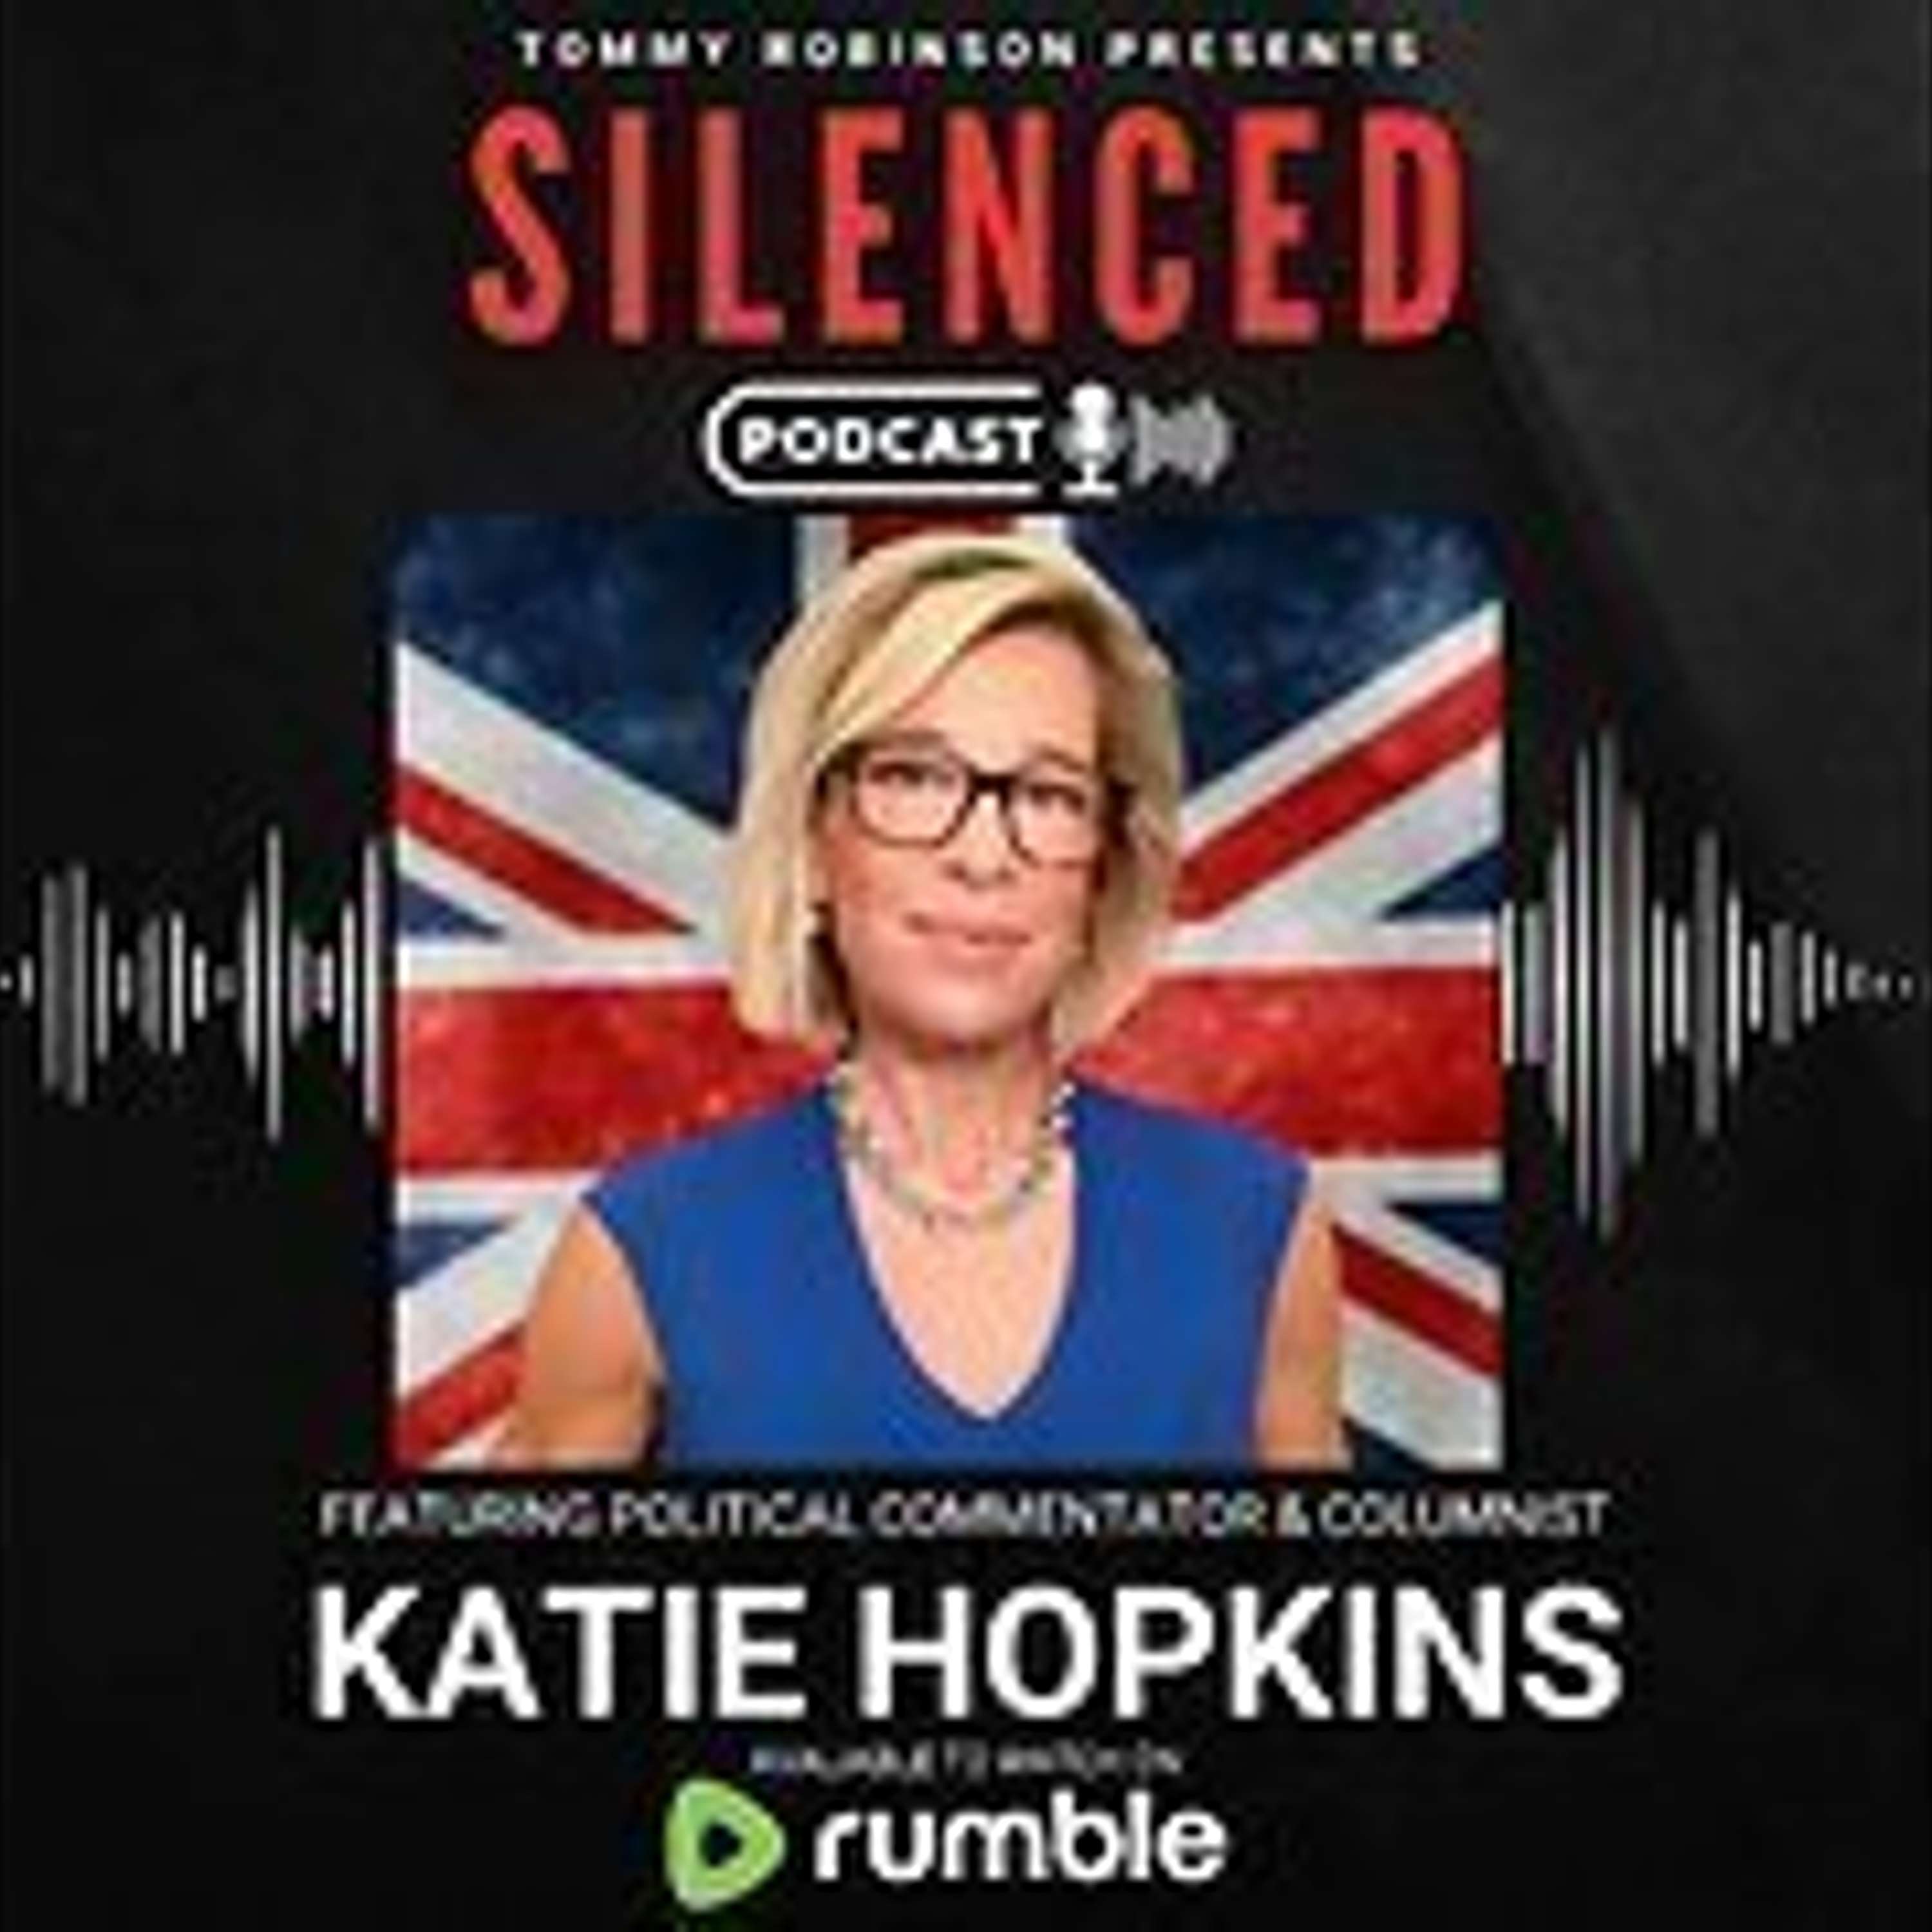 Episode 27 - SILENCED with Tommy Robinson - Katie Hopkins